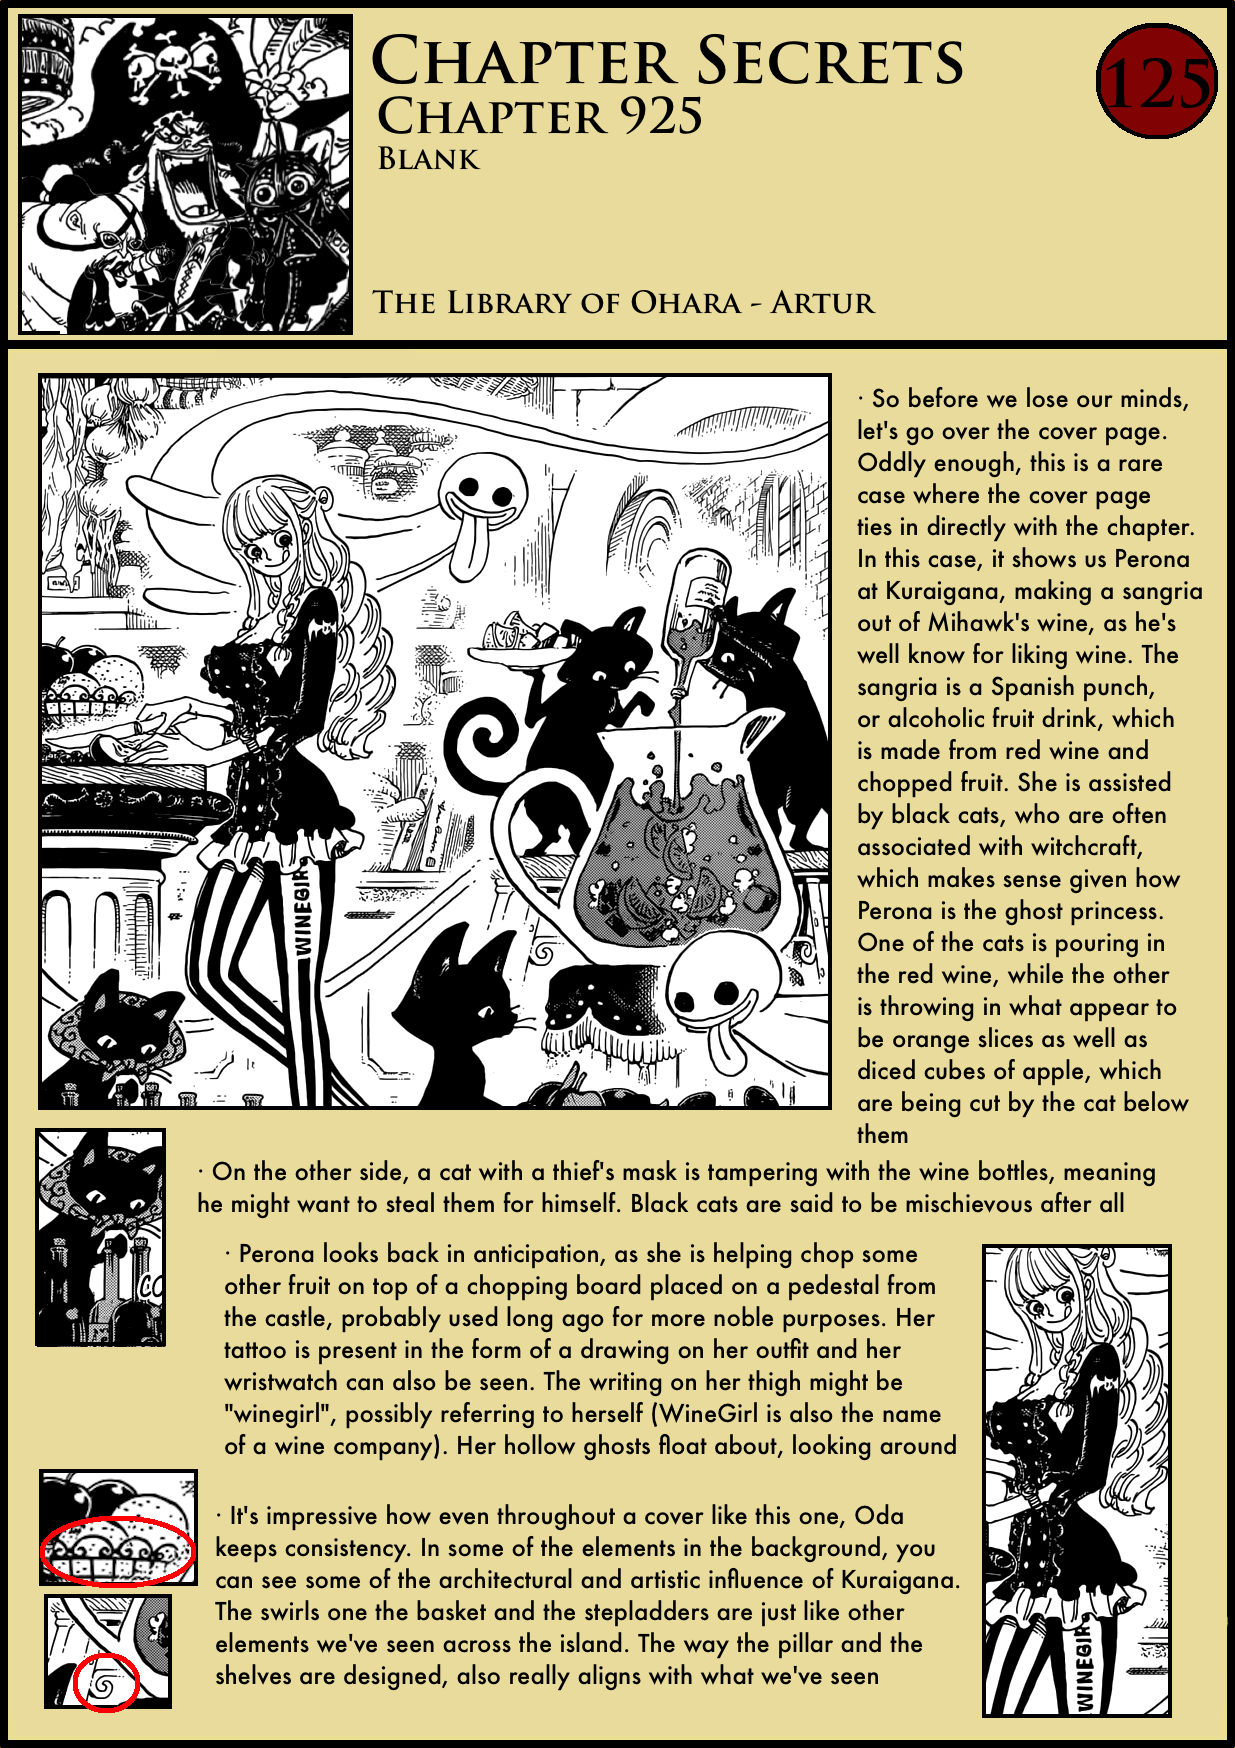 Artur - Library of Ohara on X: Drawing by Oda for the What if